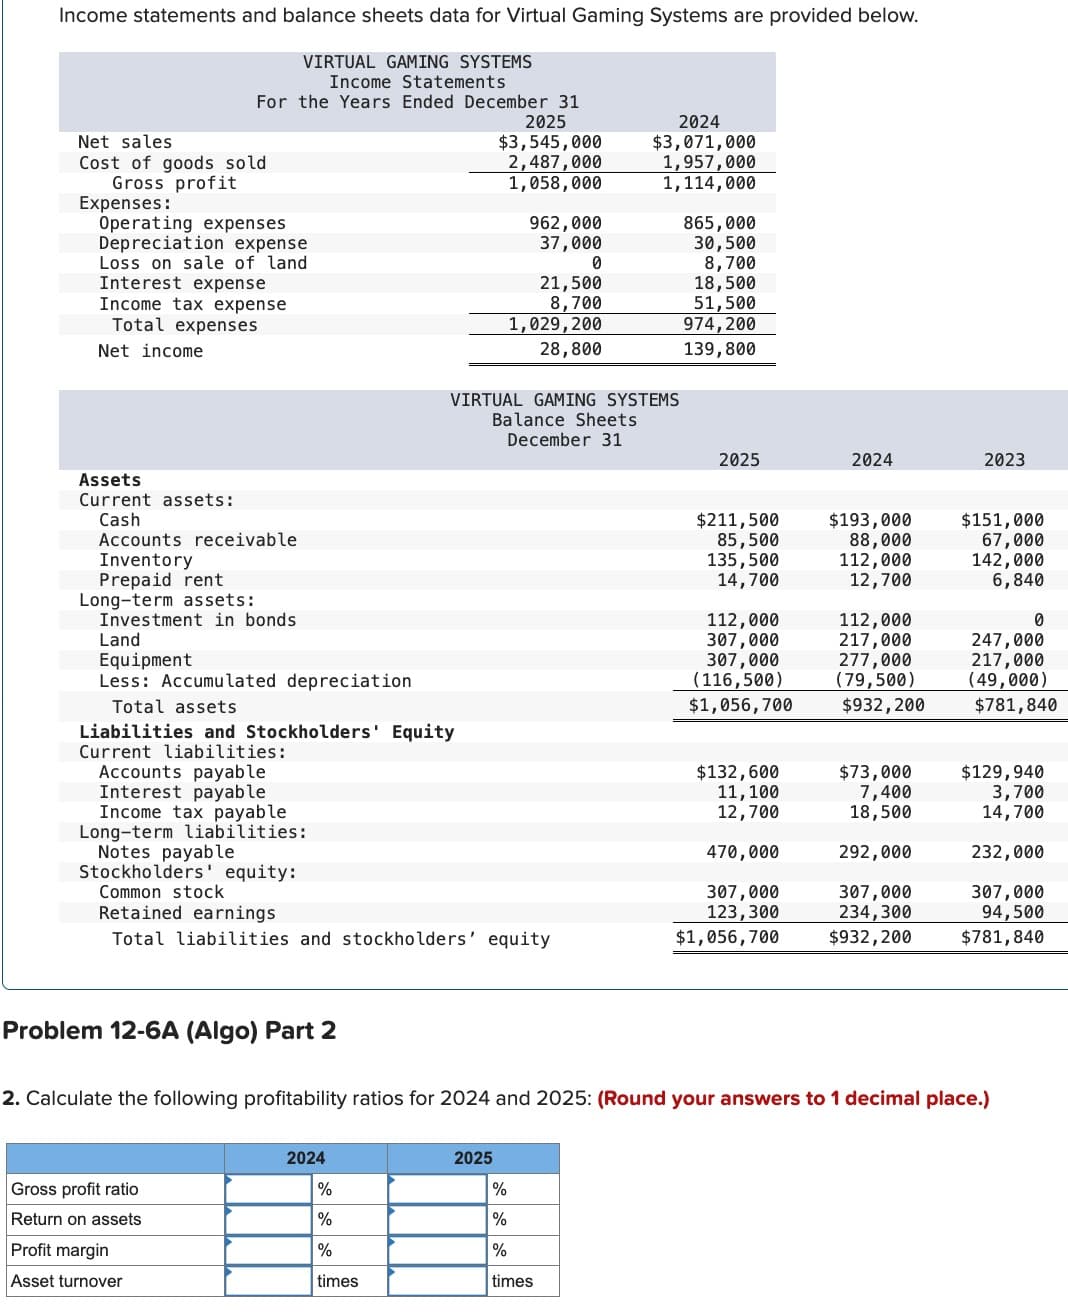 Income statements and balance sheets data for Virtual Gaming Systems are provided below.
VIRTUAL GAMING SYSTEMS
Income Statements
For the Years Ended December 31
2025
$3,545,000
2,487,000
Net sales
Cost of goods sold
Gross profit
Expenses:
Operating expenses
Depreciation expense
Loss on sale of land
Interest expense
Income tax expense
Total expenses
Net income
2024
$3,071,000
1,957,000
1,058,000
1,114,000
962,000
865.000
37,000
30,500
0
8,700
21,500
18,500
8,700
51,500
1,029,200
974,200
139,800
28,800
VIRTUAL GAMING SYSTEMS
Balance Sheets
December 31
2025
2024
2023
Land
Assets
Current assets:
Cash
Accounts receivable
Inventory
Prepaid rent
Long-term assets:
Investment in bonds
Equipment
$211,500
$193,000
85,500
88,000
$151,000
67,000
135,500
112,000
142,000
14,700
12,700
6,840
112,000
112,000
0
307,000
217,000
247,000
307,000
277,000
217,000
Less: Accumulated depreciation
(116,500)
(79,500)
(49,000)
Total assets
$1,056,700
$932,200
$781,840
Liabilities and Stockholders' Equity
Current liabilities:
Accounts payable
$132,600
$73,000
$129,940
Interest payable
11,100
7,400
3,700
Income tax payable
12,700
18,500
14,700
Long-term liabilities:
Notes payable
470,000
292,000
232,000
Stockholders' equity:
Common stock
307,000
307,000
307,000
Retained earnings
123,300
234,300
94,500
Total liabilities and stockholders' equity
$1,056,700
$932,200
$781,840
Problem 12-6A (Algo) Part 2
2. Calculate the following profitability ratios for 2024 and 2025: (Round your answers to 1 decimal place.)
2024
2025
Gross profit ratio
%
%
Return on assets
%
%
Profit margin
%
%
Asset turnover
times
times